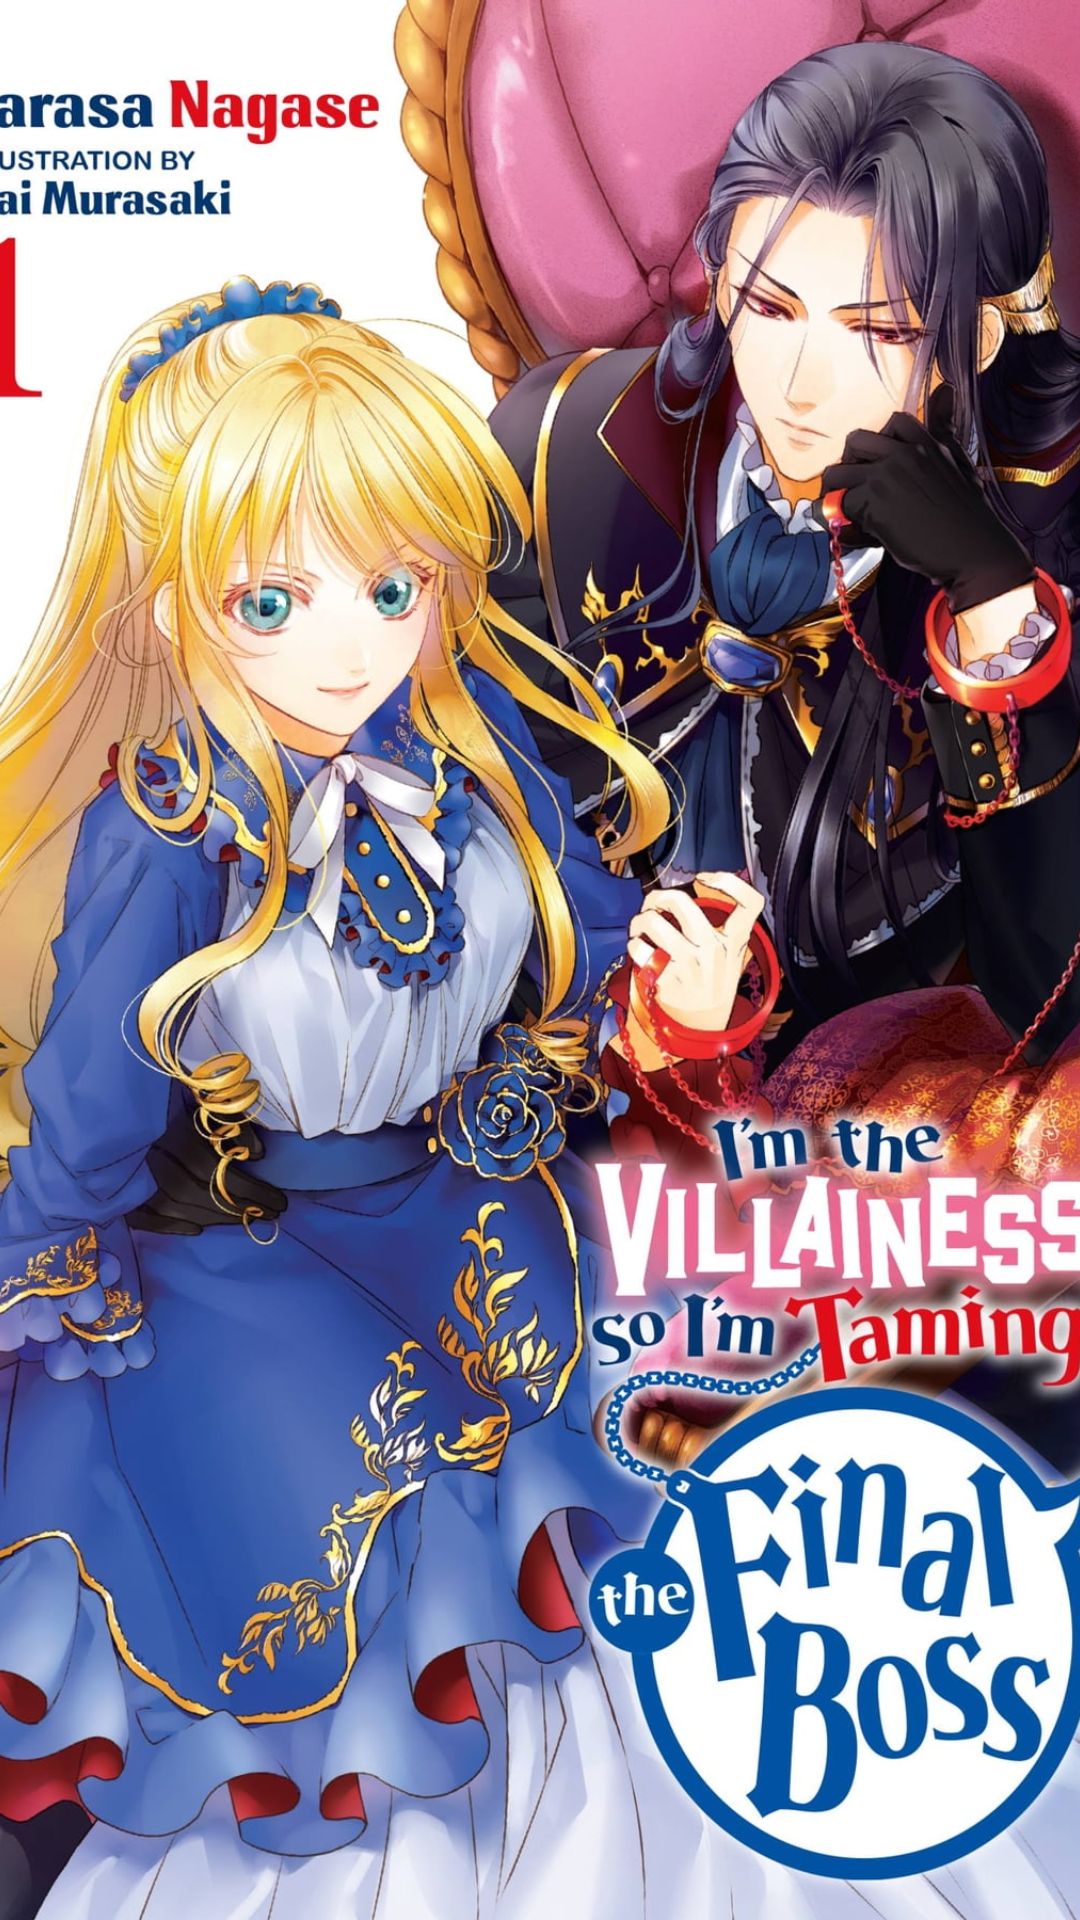 I’m the Villainess: October Release, New Trailer, Visual